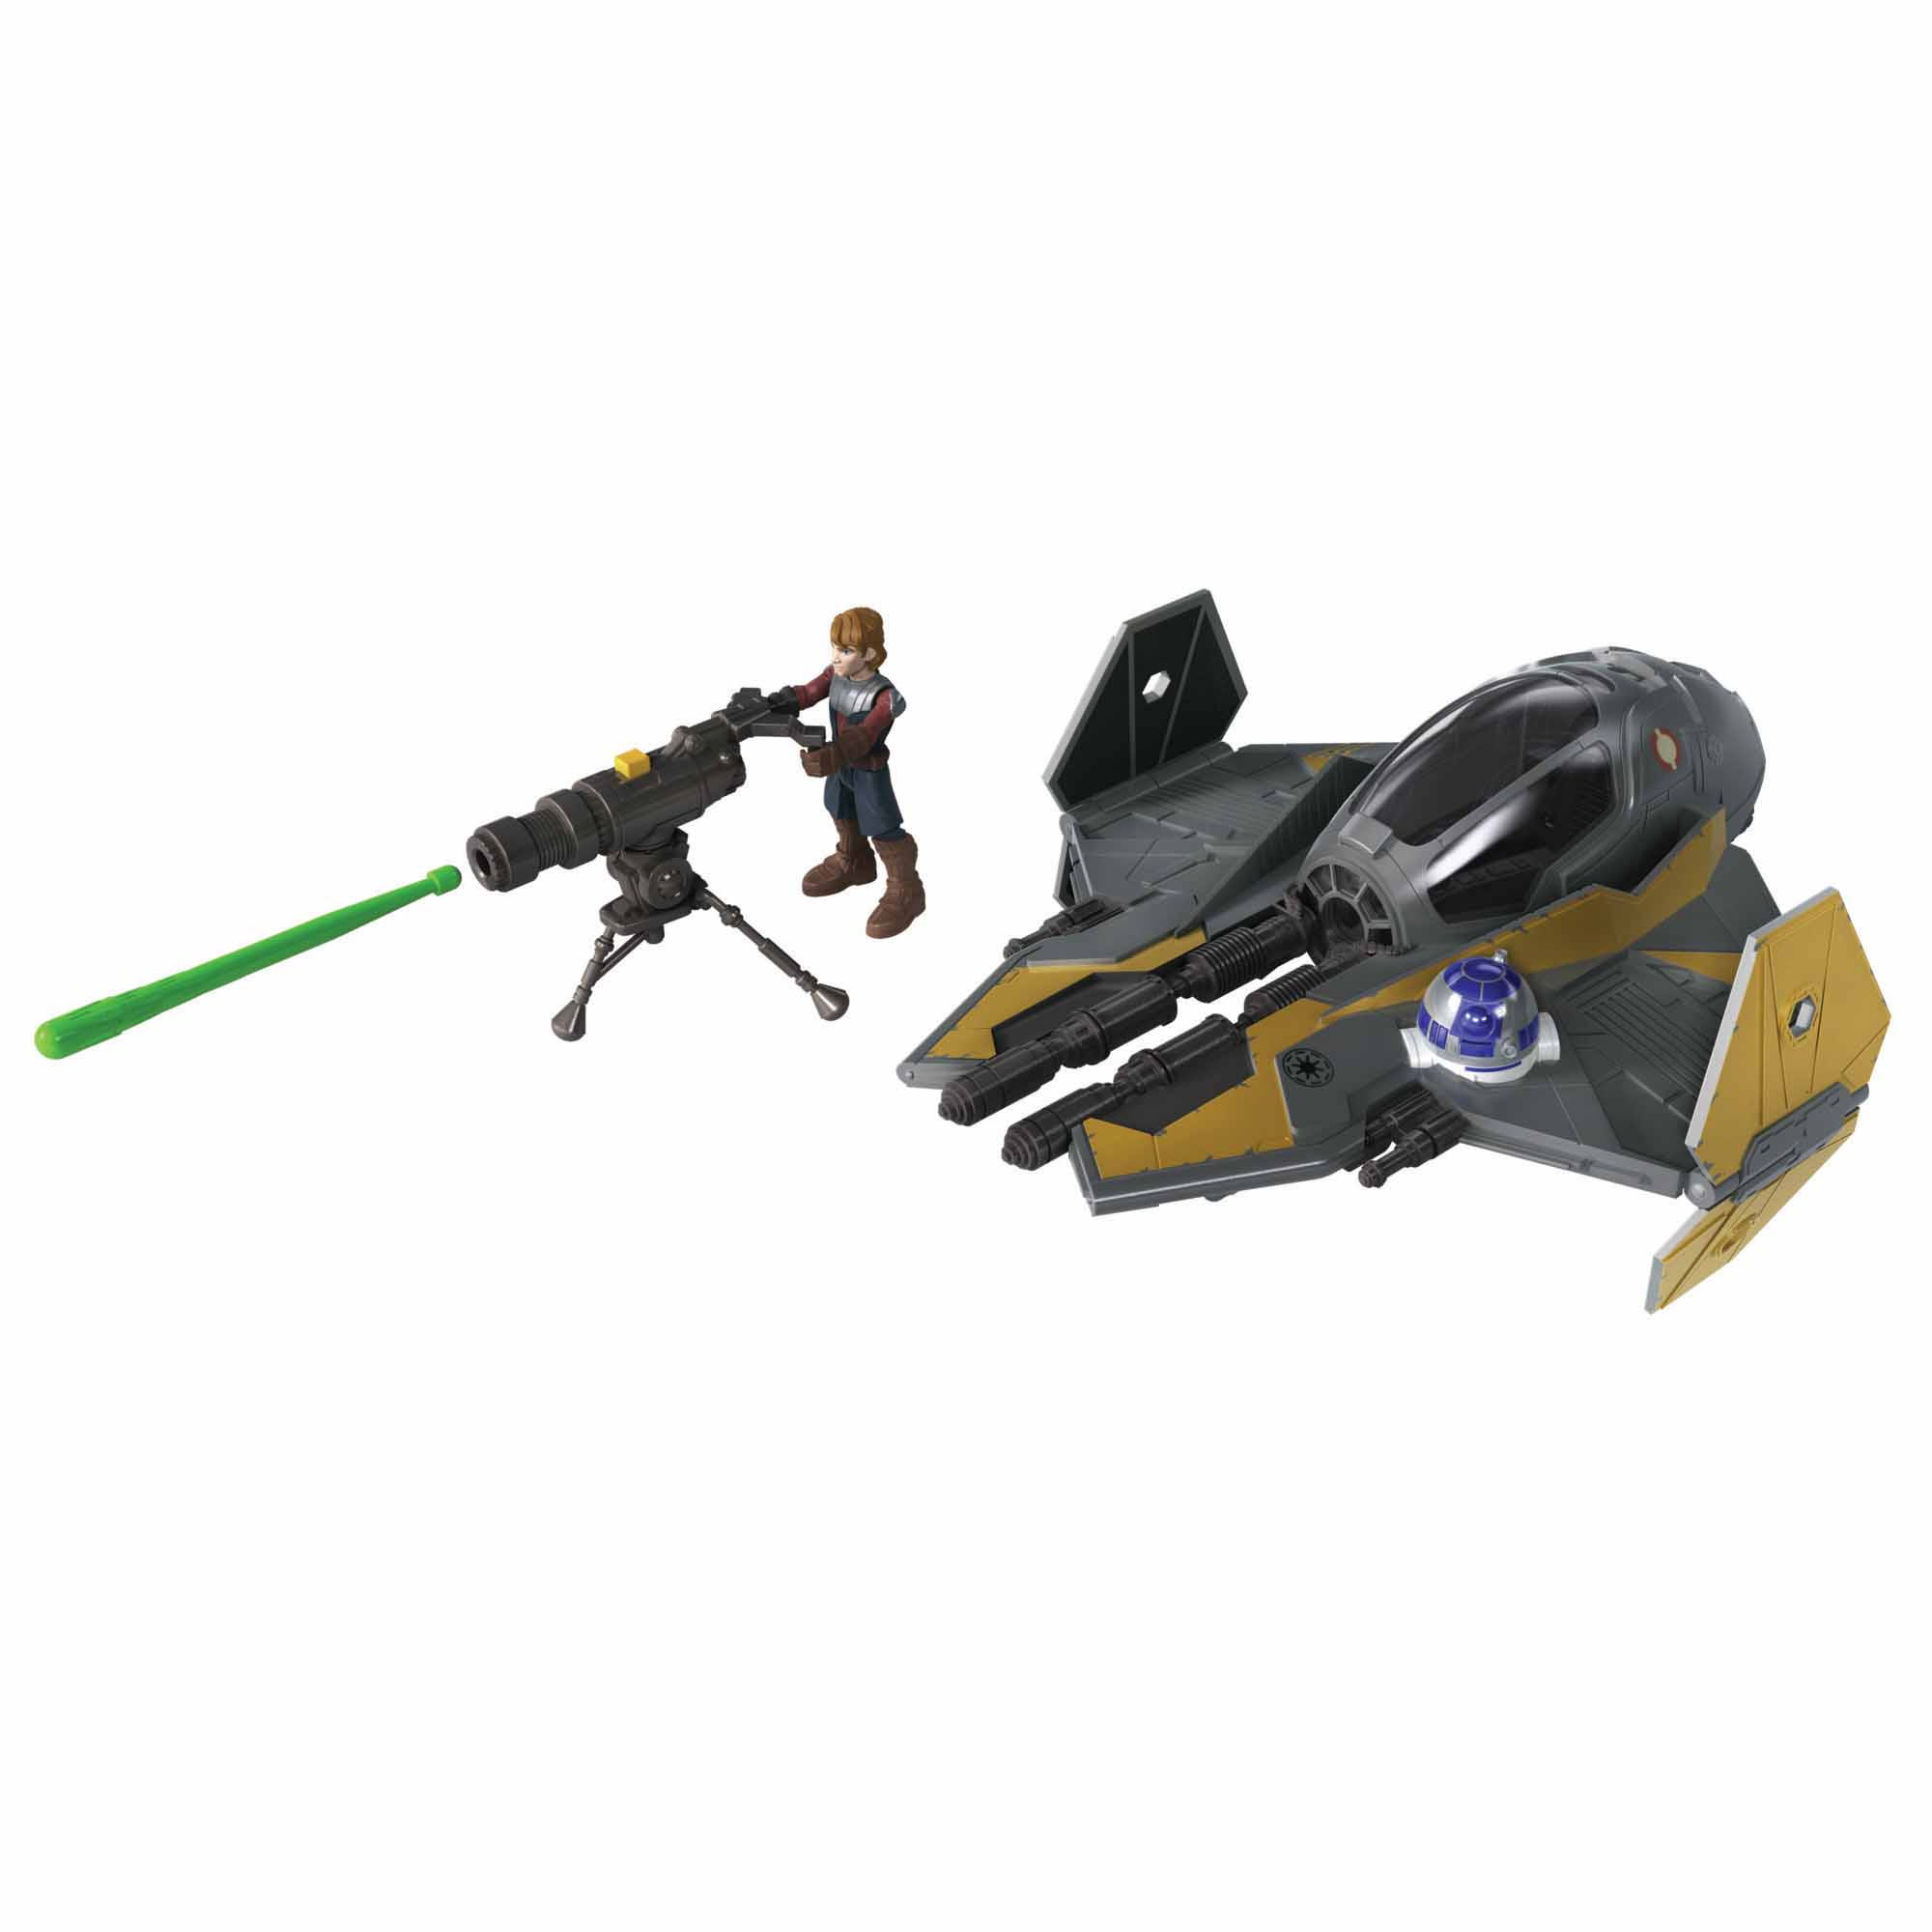 Star Wars Mission Fleet Stellar Class Anakin Skywalker Jedi Starfighter 2.5-Inch-Scale Figure and Vehicle, Ages 4 and Up